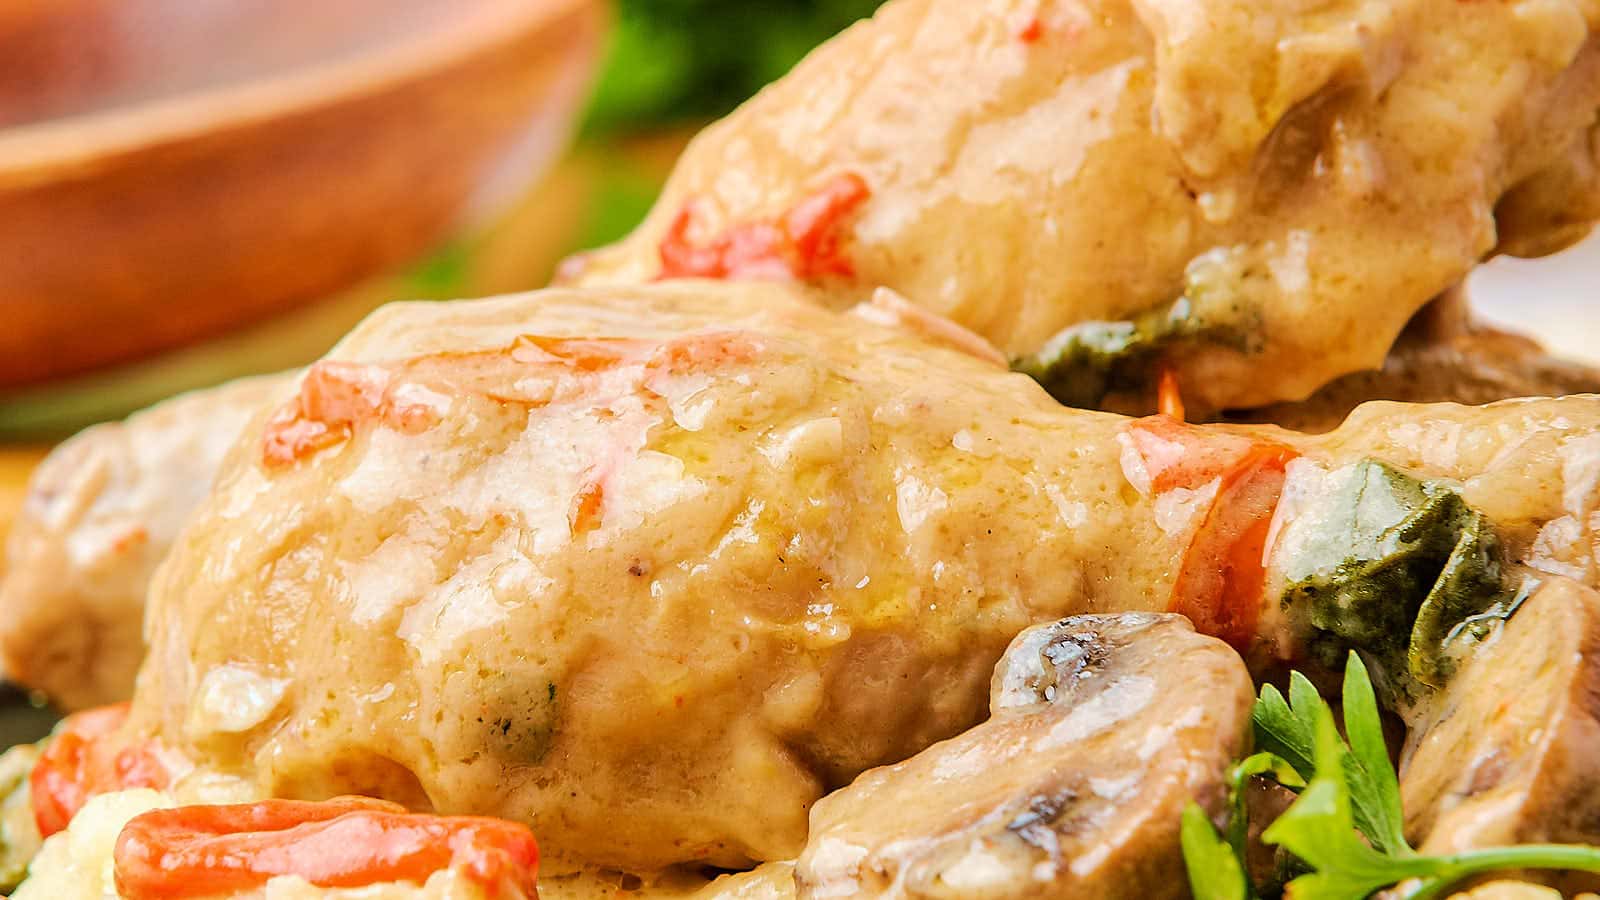 Slow Cooker Creamy Chicken and Mushrooms recipe by Cheerful Cook.